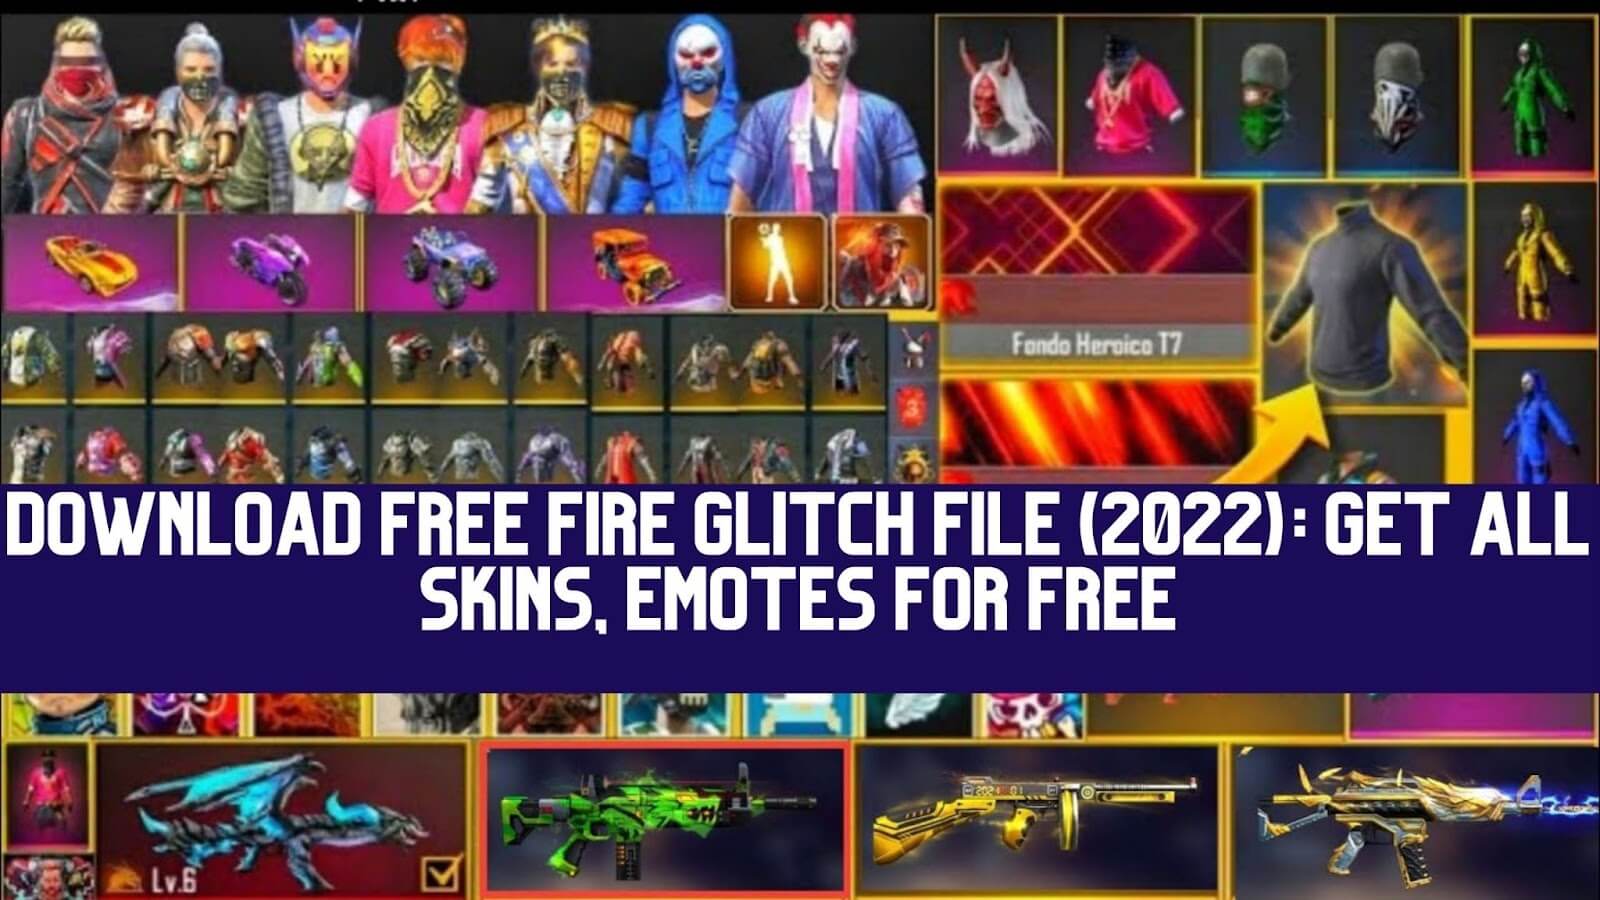 Download Free Fire Glitch File (2023) App: Get All Skins, Emotes for Freew